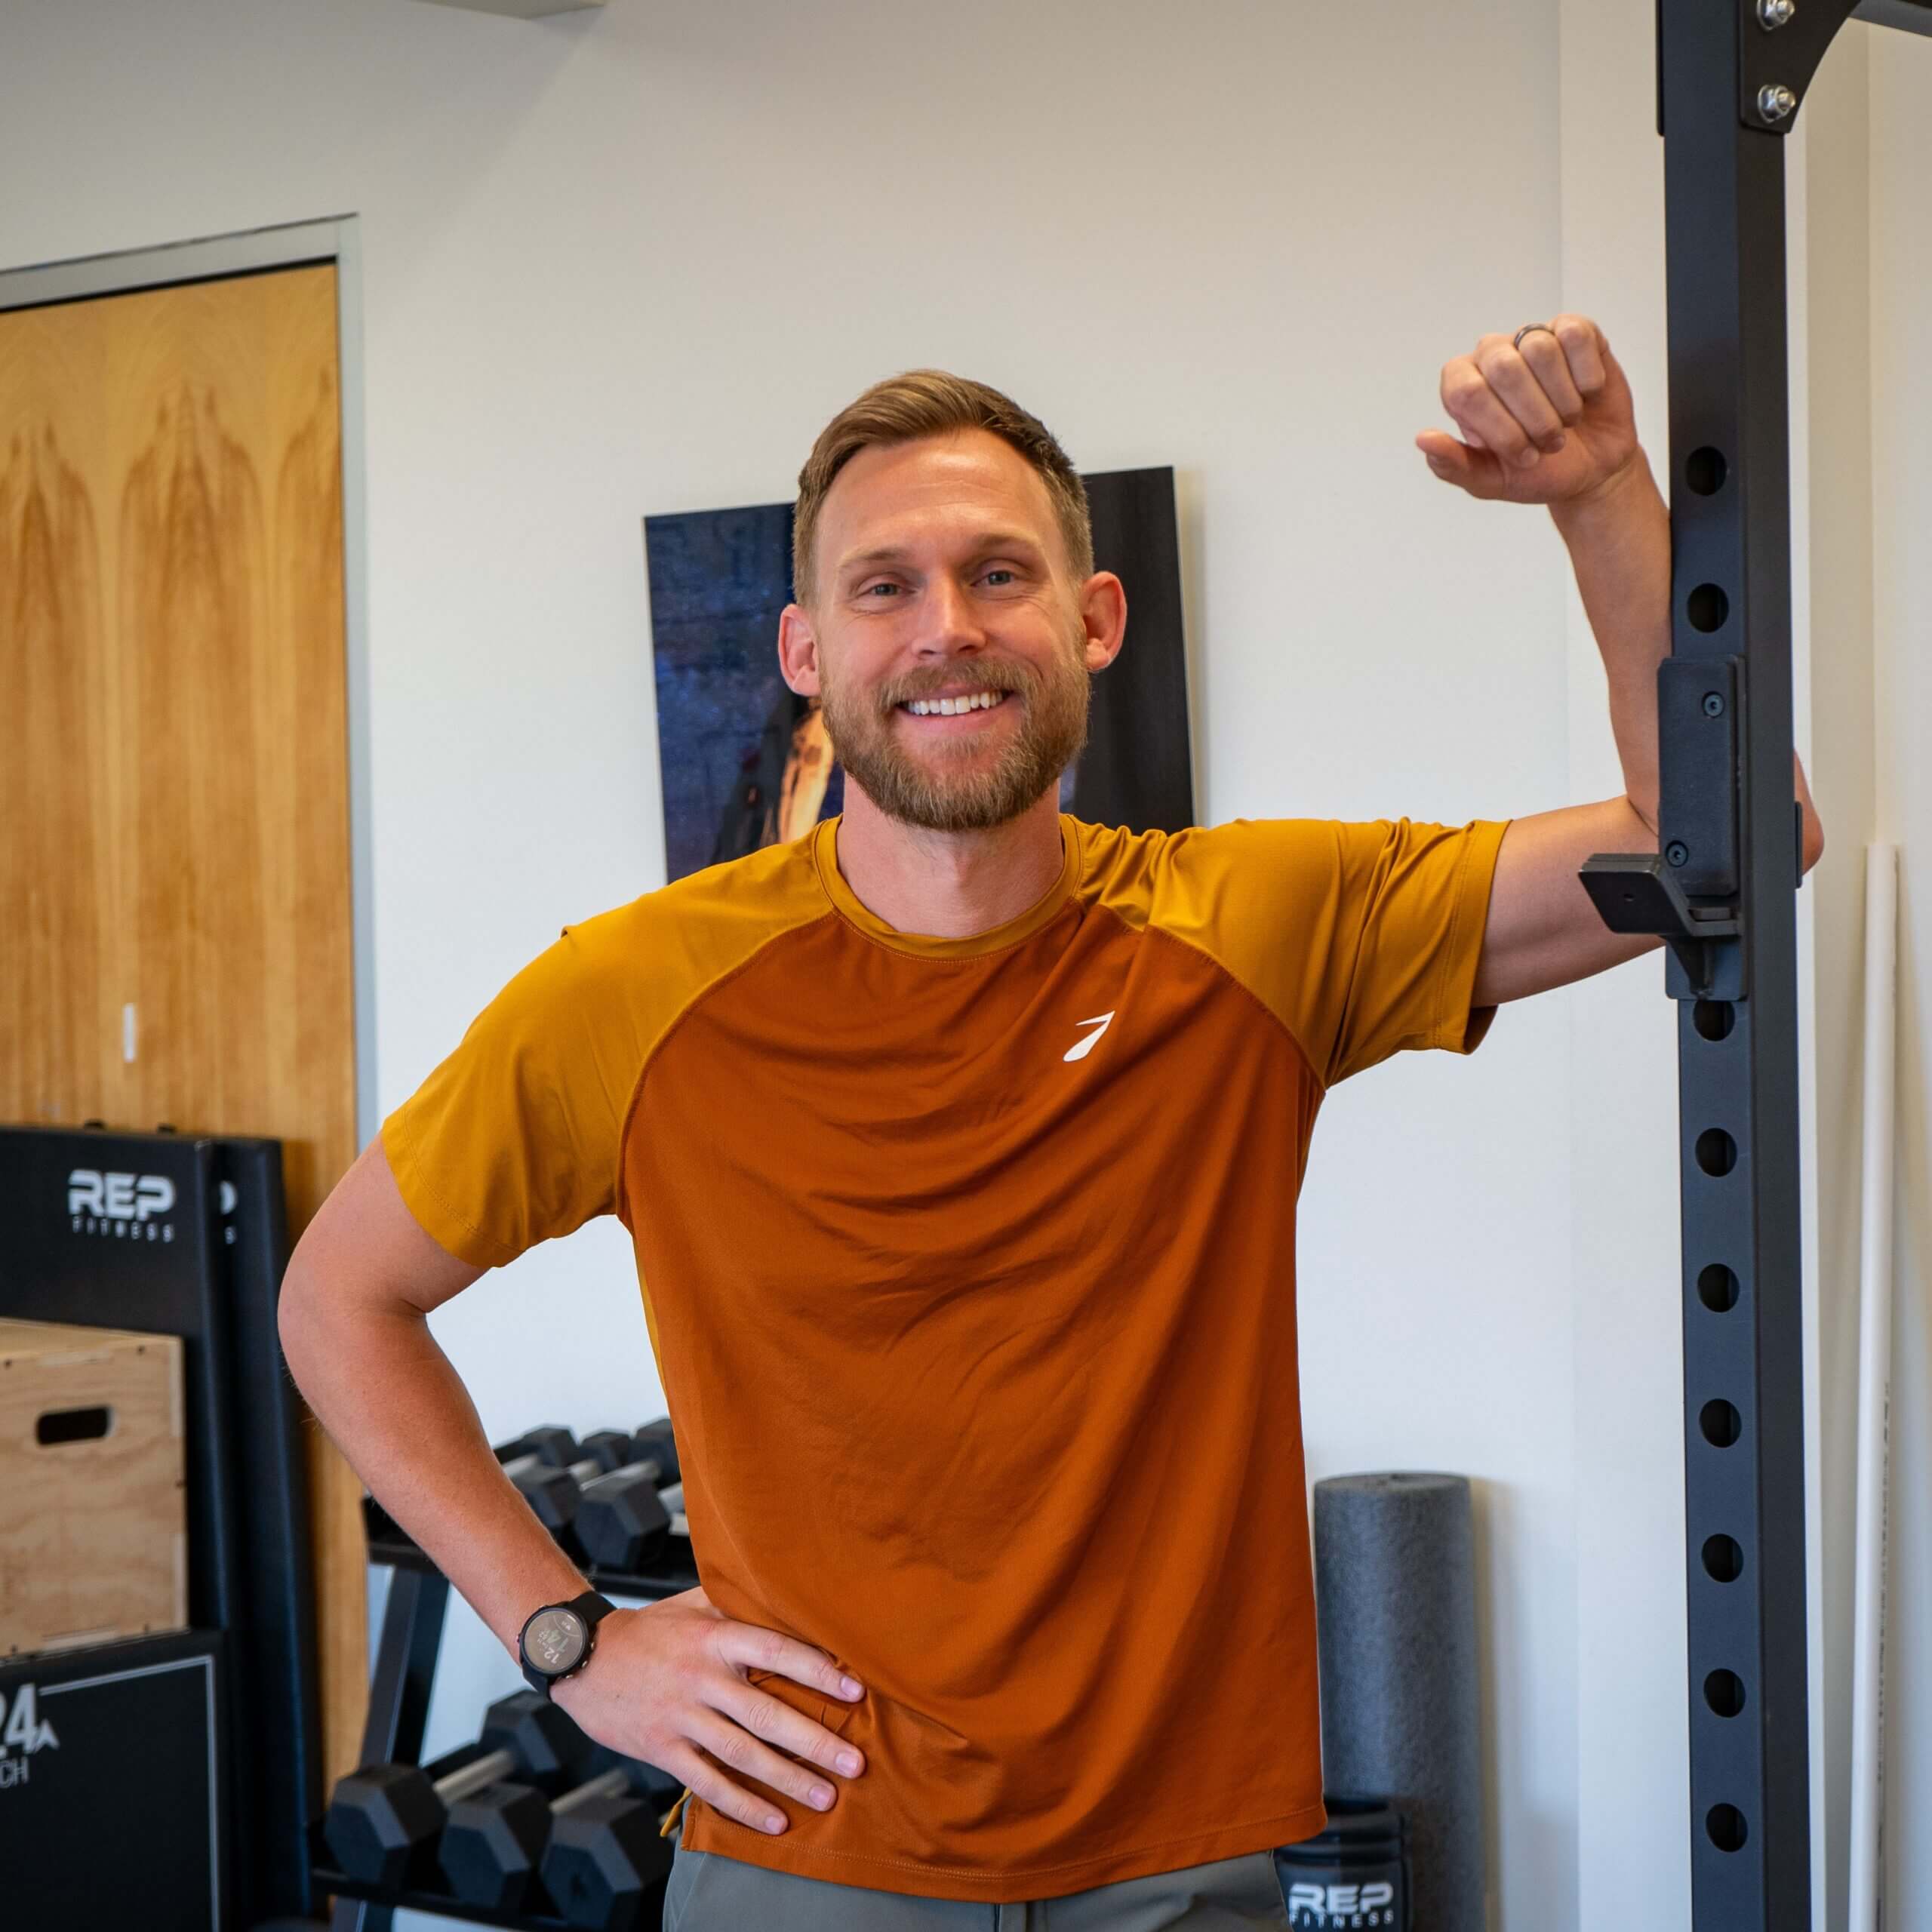 A smiling man in a mustard-yellow t-shirt stands beside physical therapy equipment, raising one arm in a flexed position, showing a casual and friendly demeanor in a fitness environment.